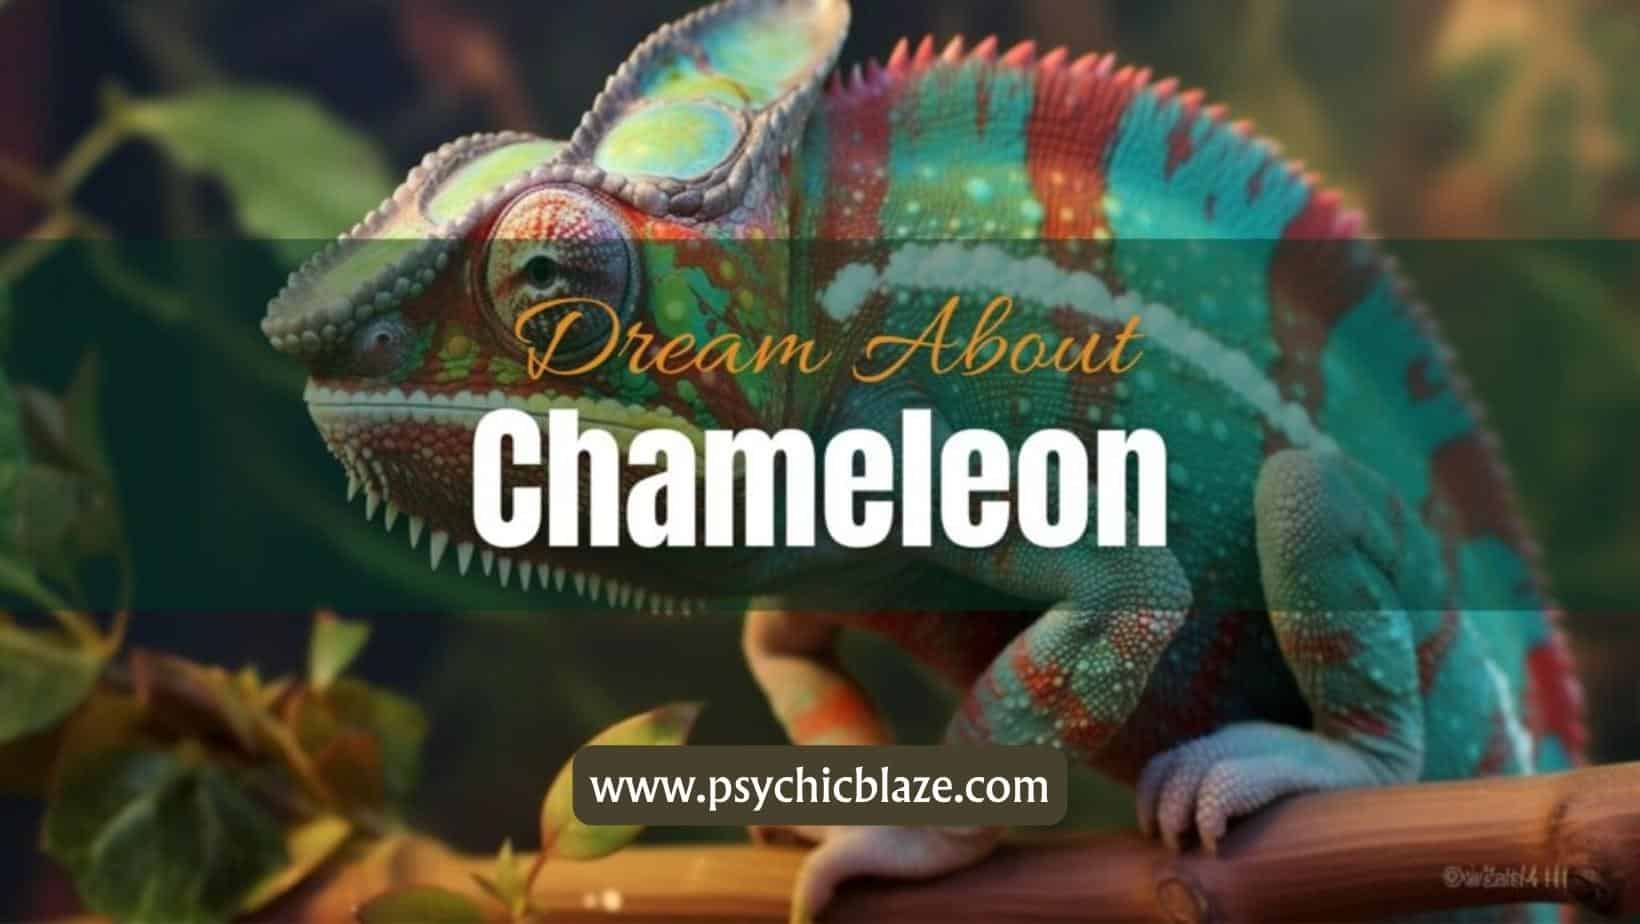 Dream about Chameleon